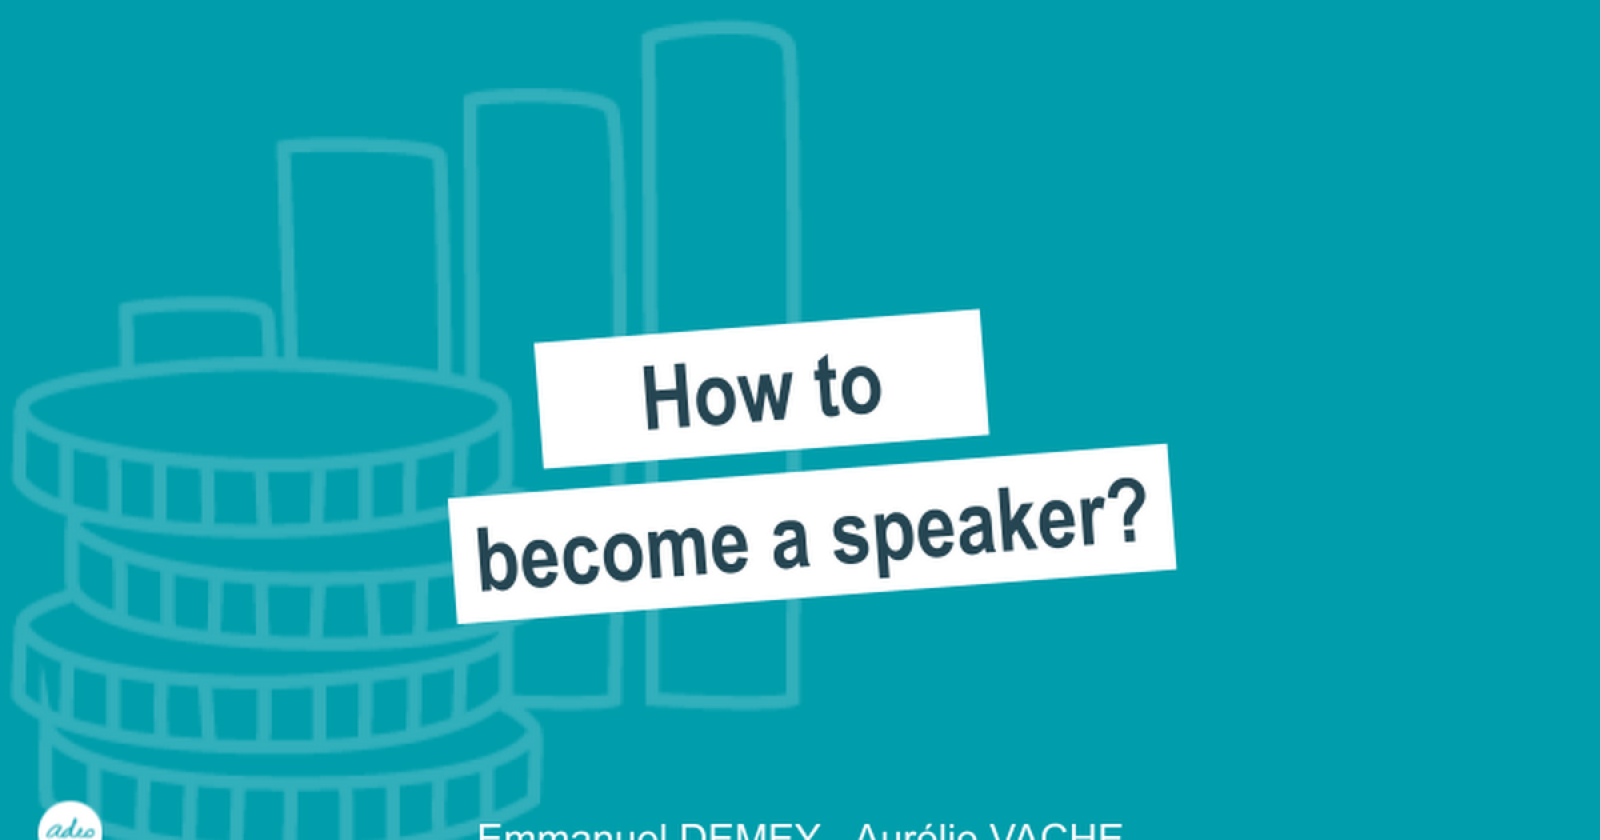 How to become a speaker?